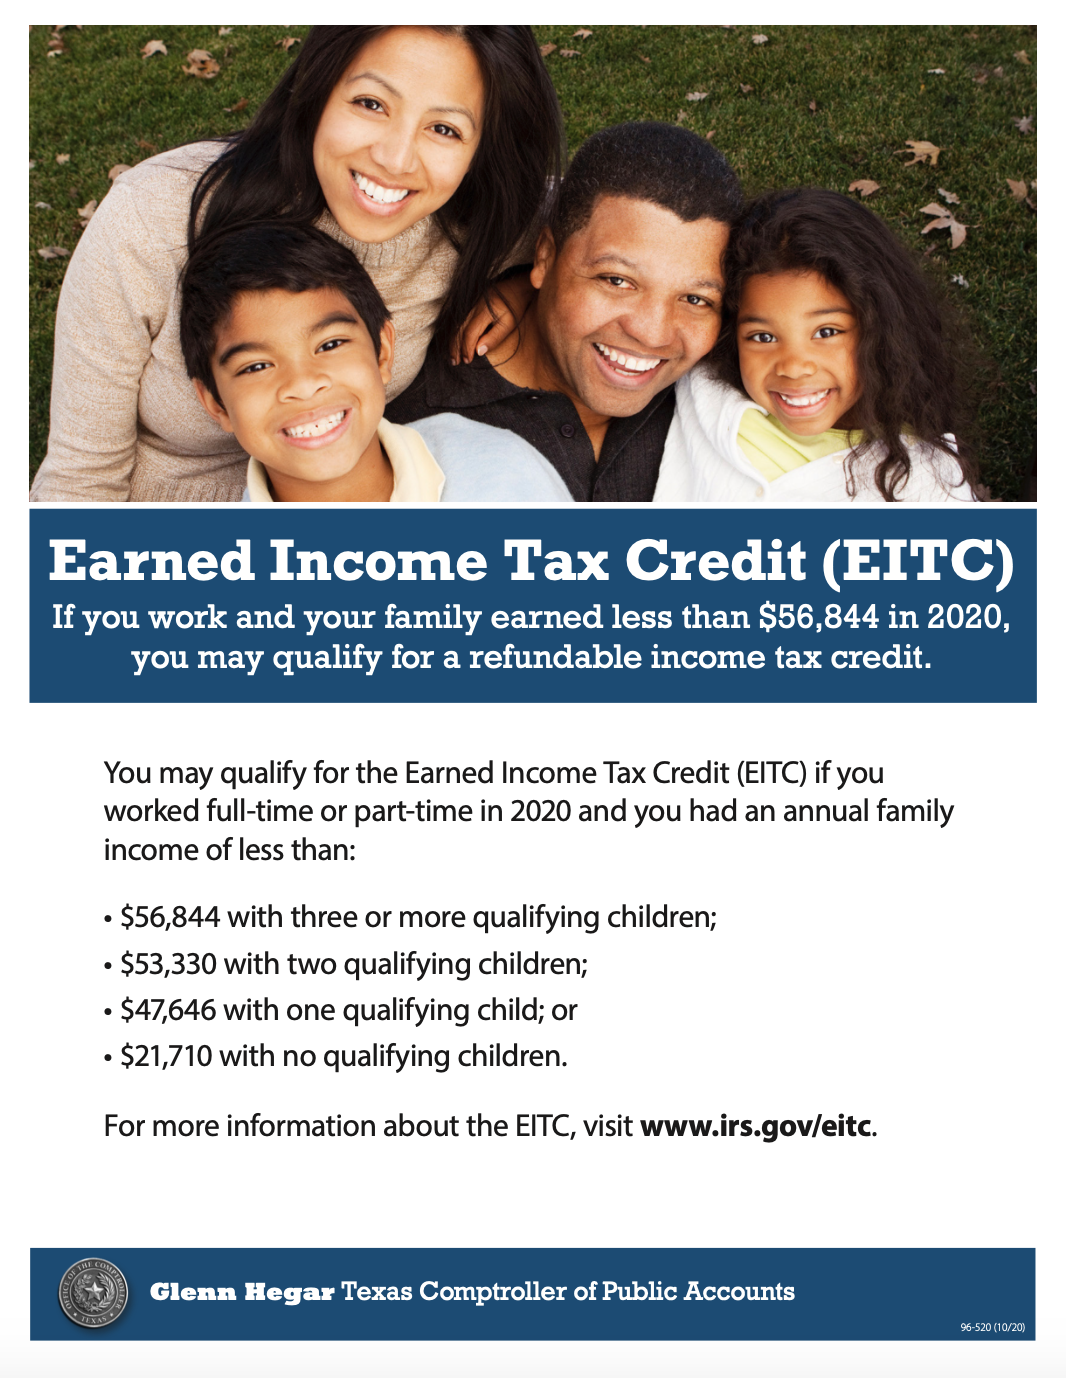 AFPG-Earned Income tax credit mailer